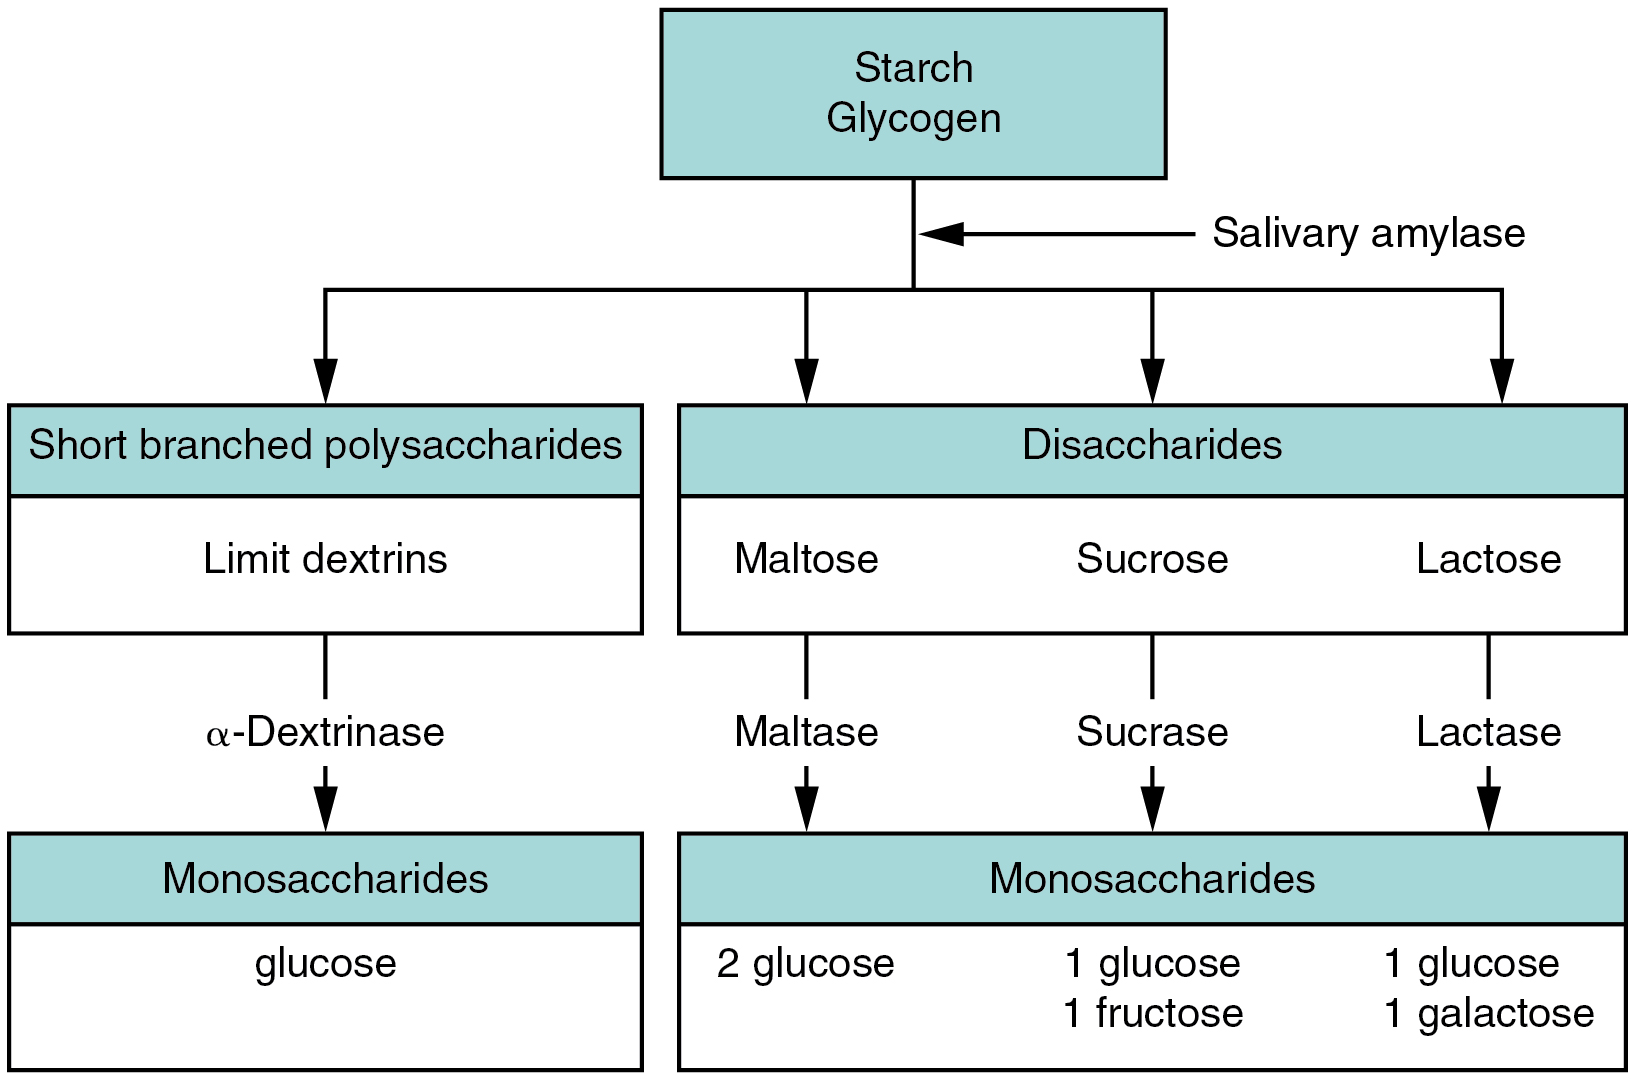 This flow chart shows the steps in digestion of carbohydrates. The different levels shown are starch and glycogen, disaccharides and monosaccharides. Under each type of sugar, examples and the enzymes responsible for digestion are listed.